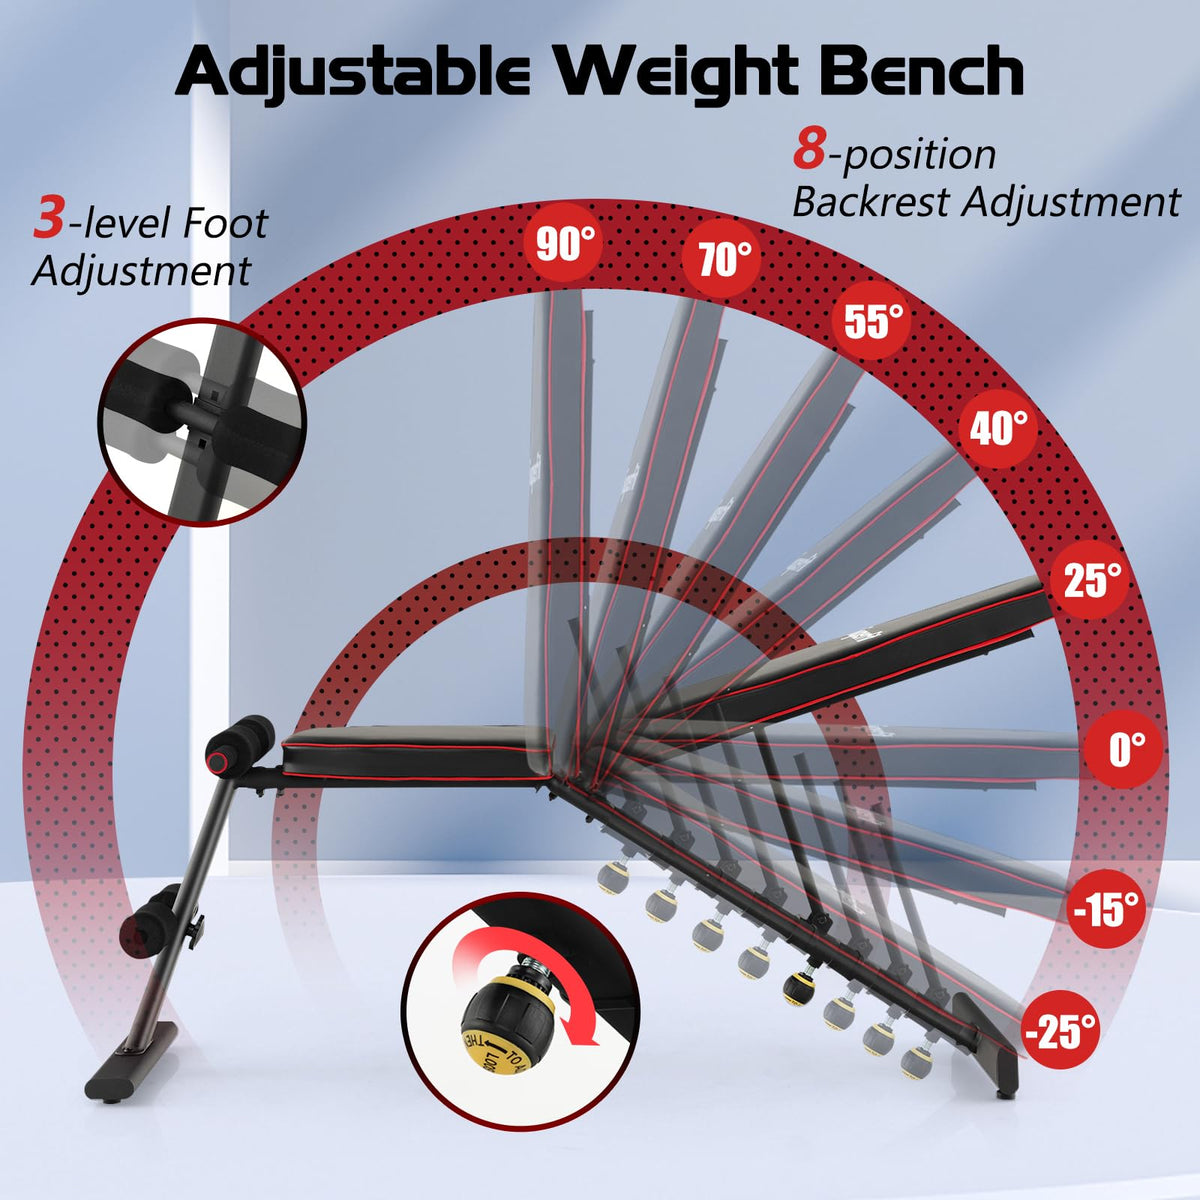 Adjustable Weight Bench, Heavy Duty Strength Training FID Bench for Bench Press